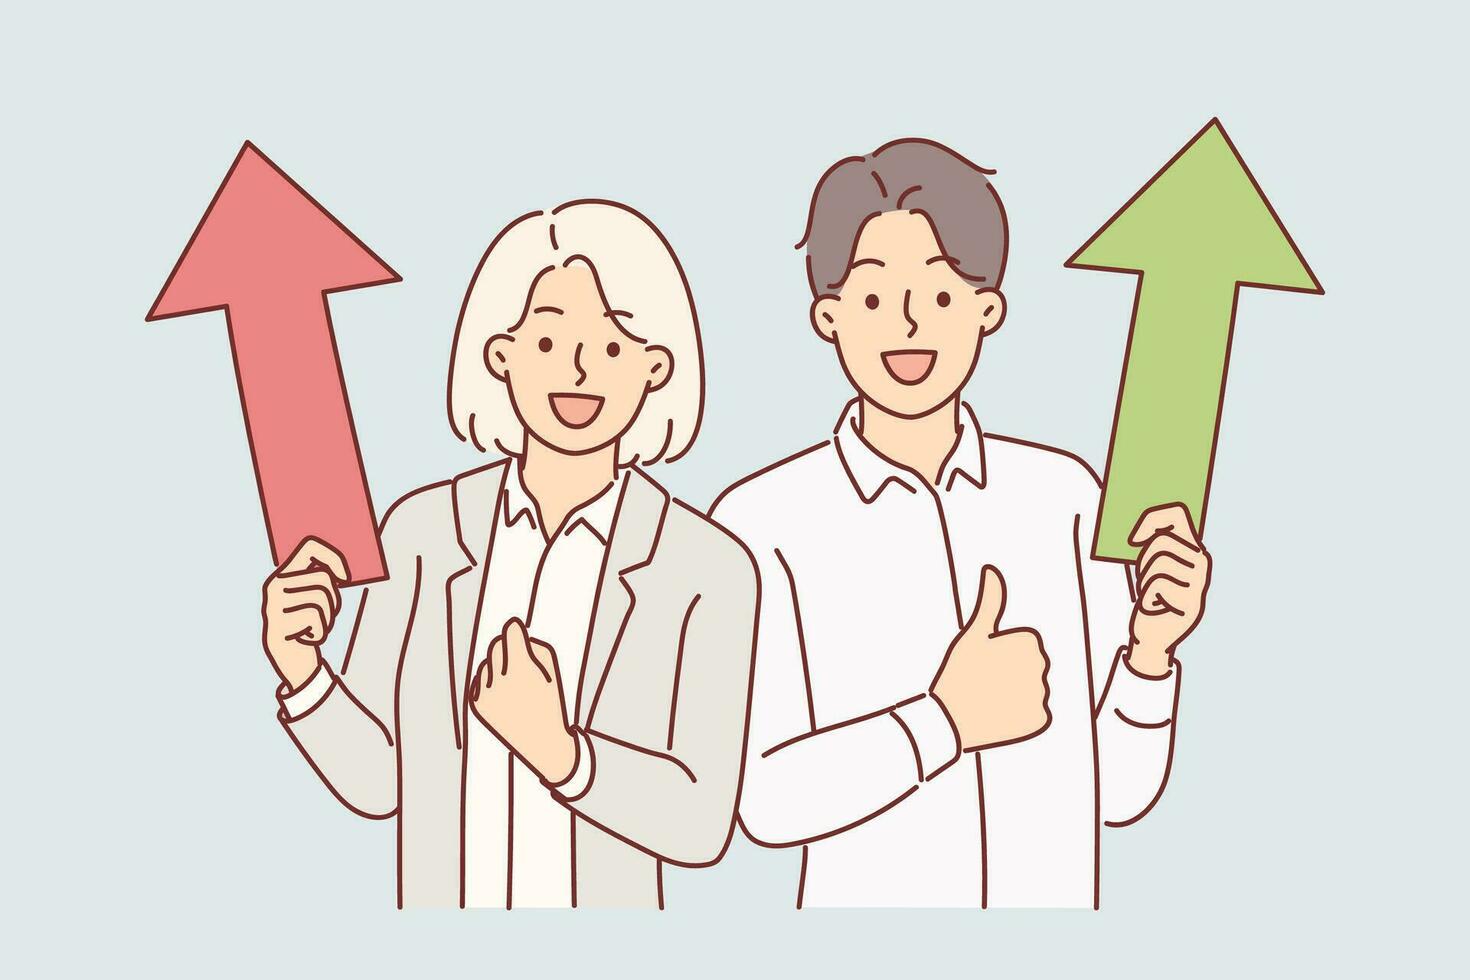 Successful business man and woman holding up arrows showing victory gesture rejoicing in career achievements. Concept of successful completion of project and growth of capital or dividends vector